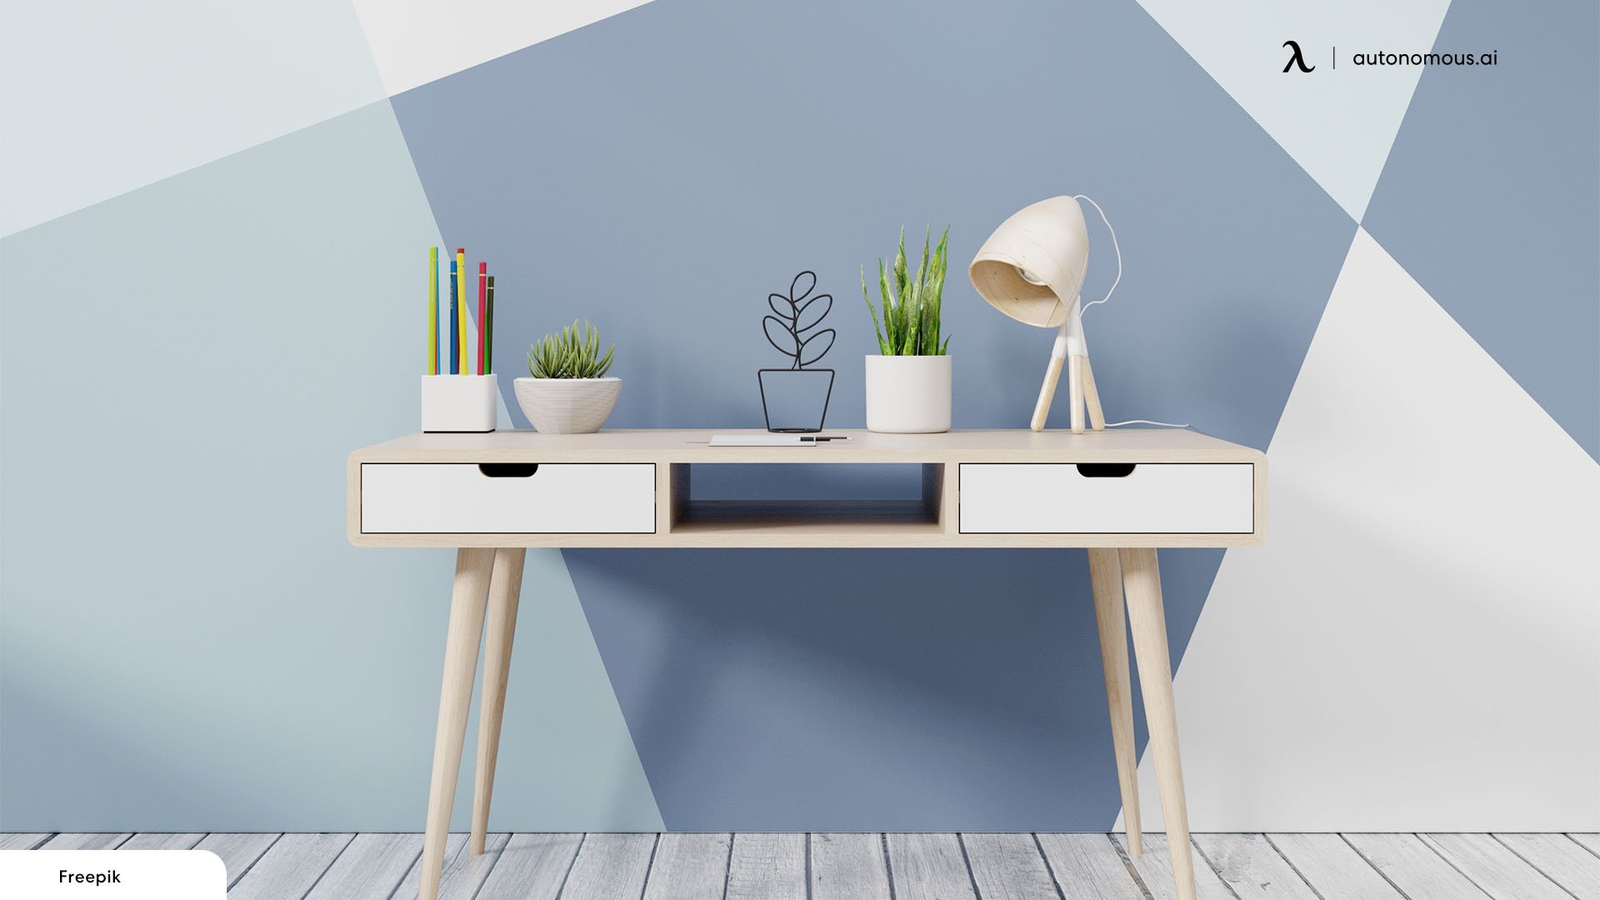 Shop for Small Student Desks for Space Saving (20 Best Product Ratings)